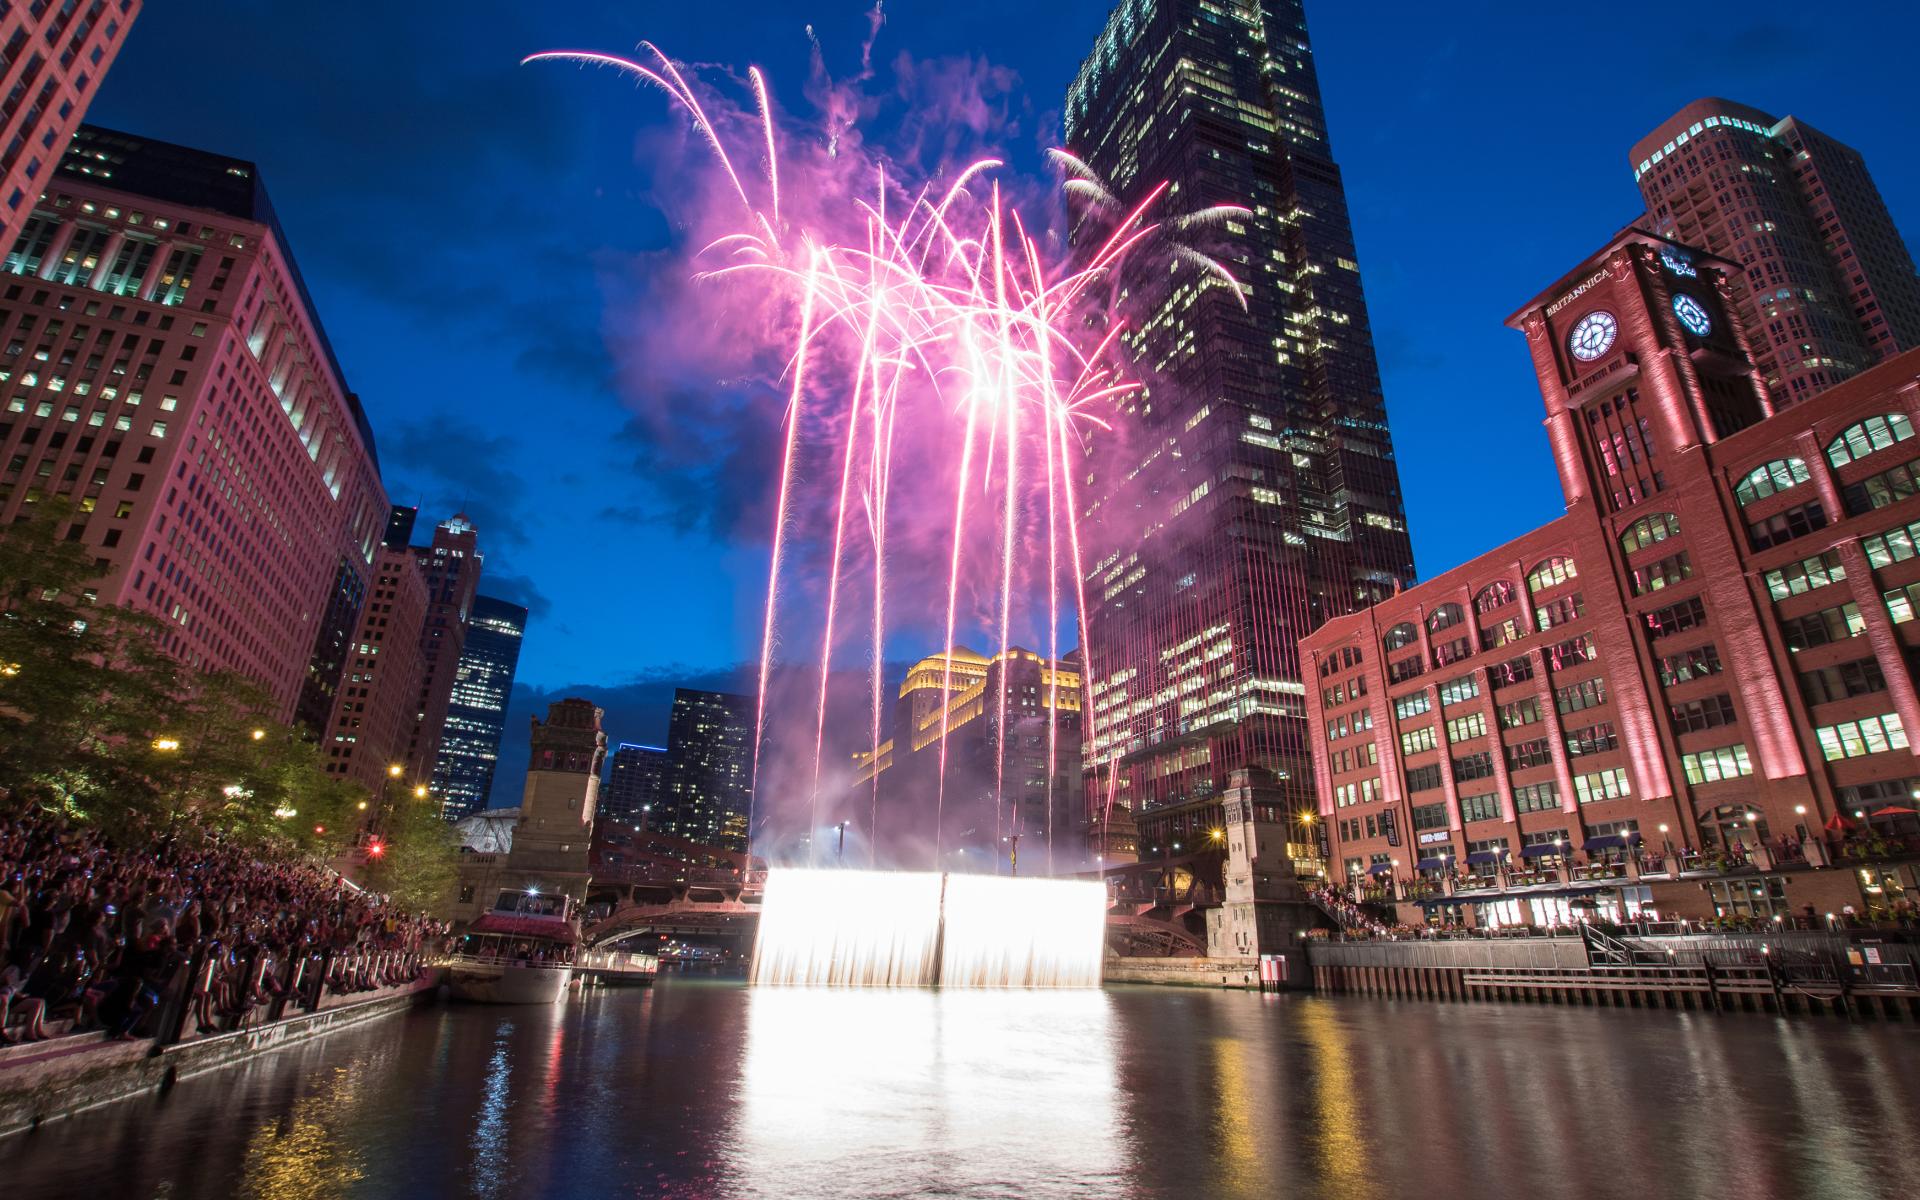 Fireworks over the Chicago river